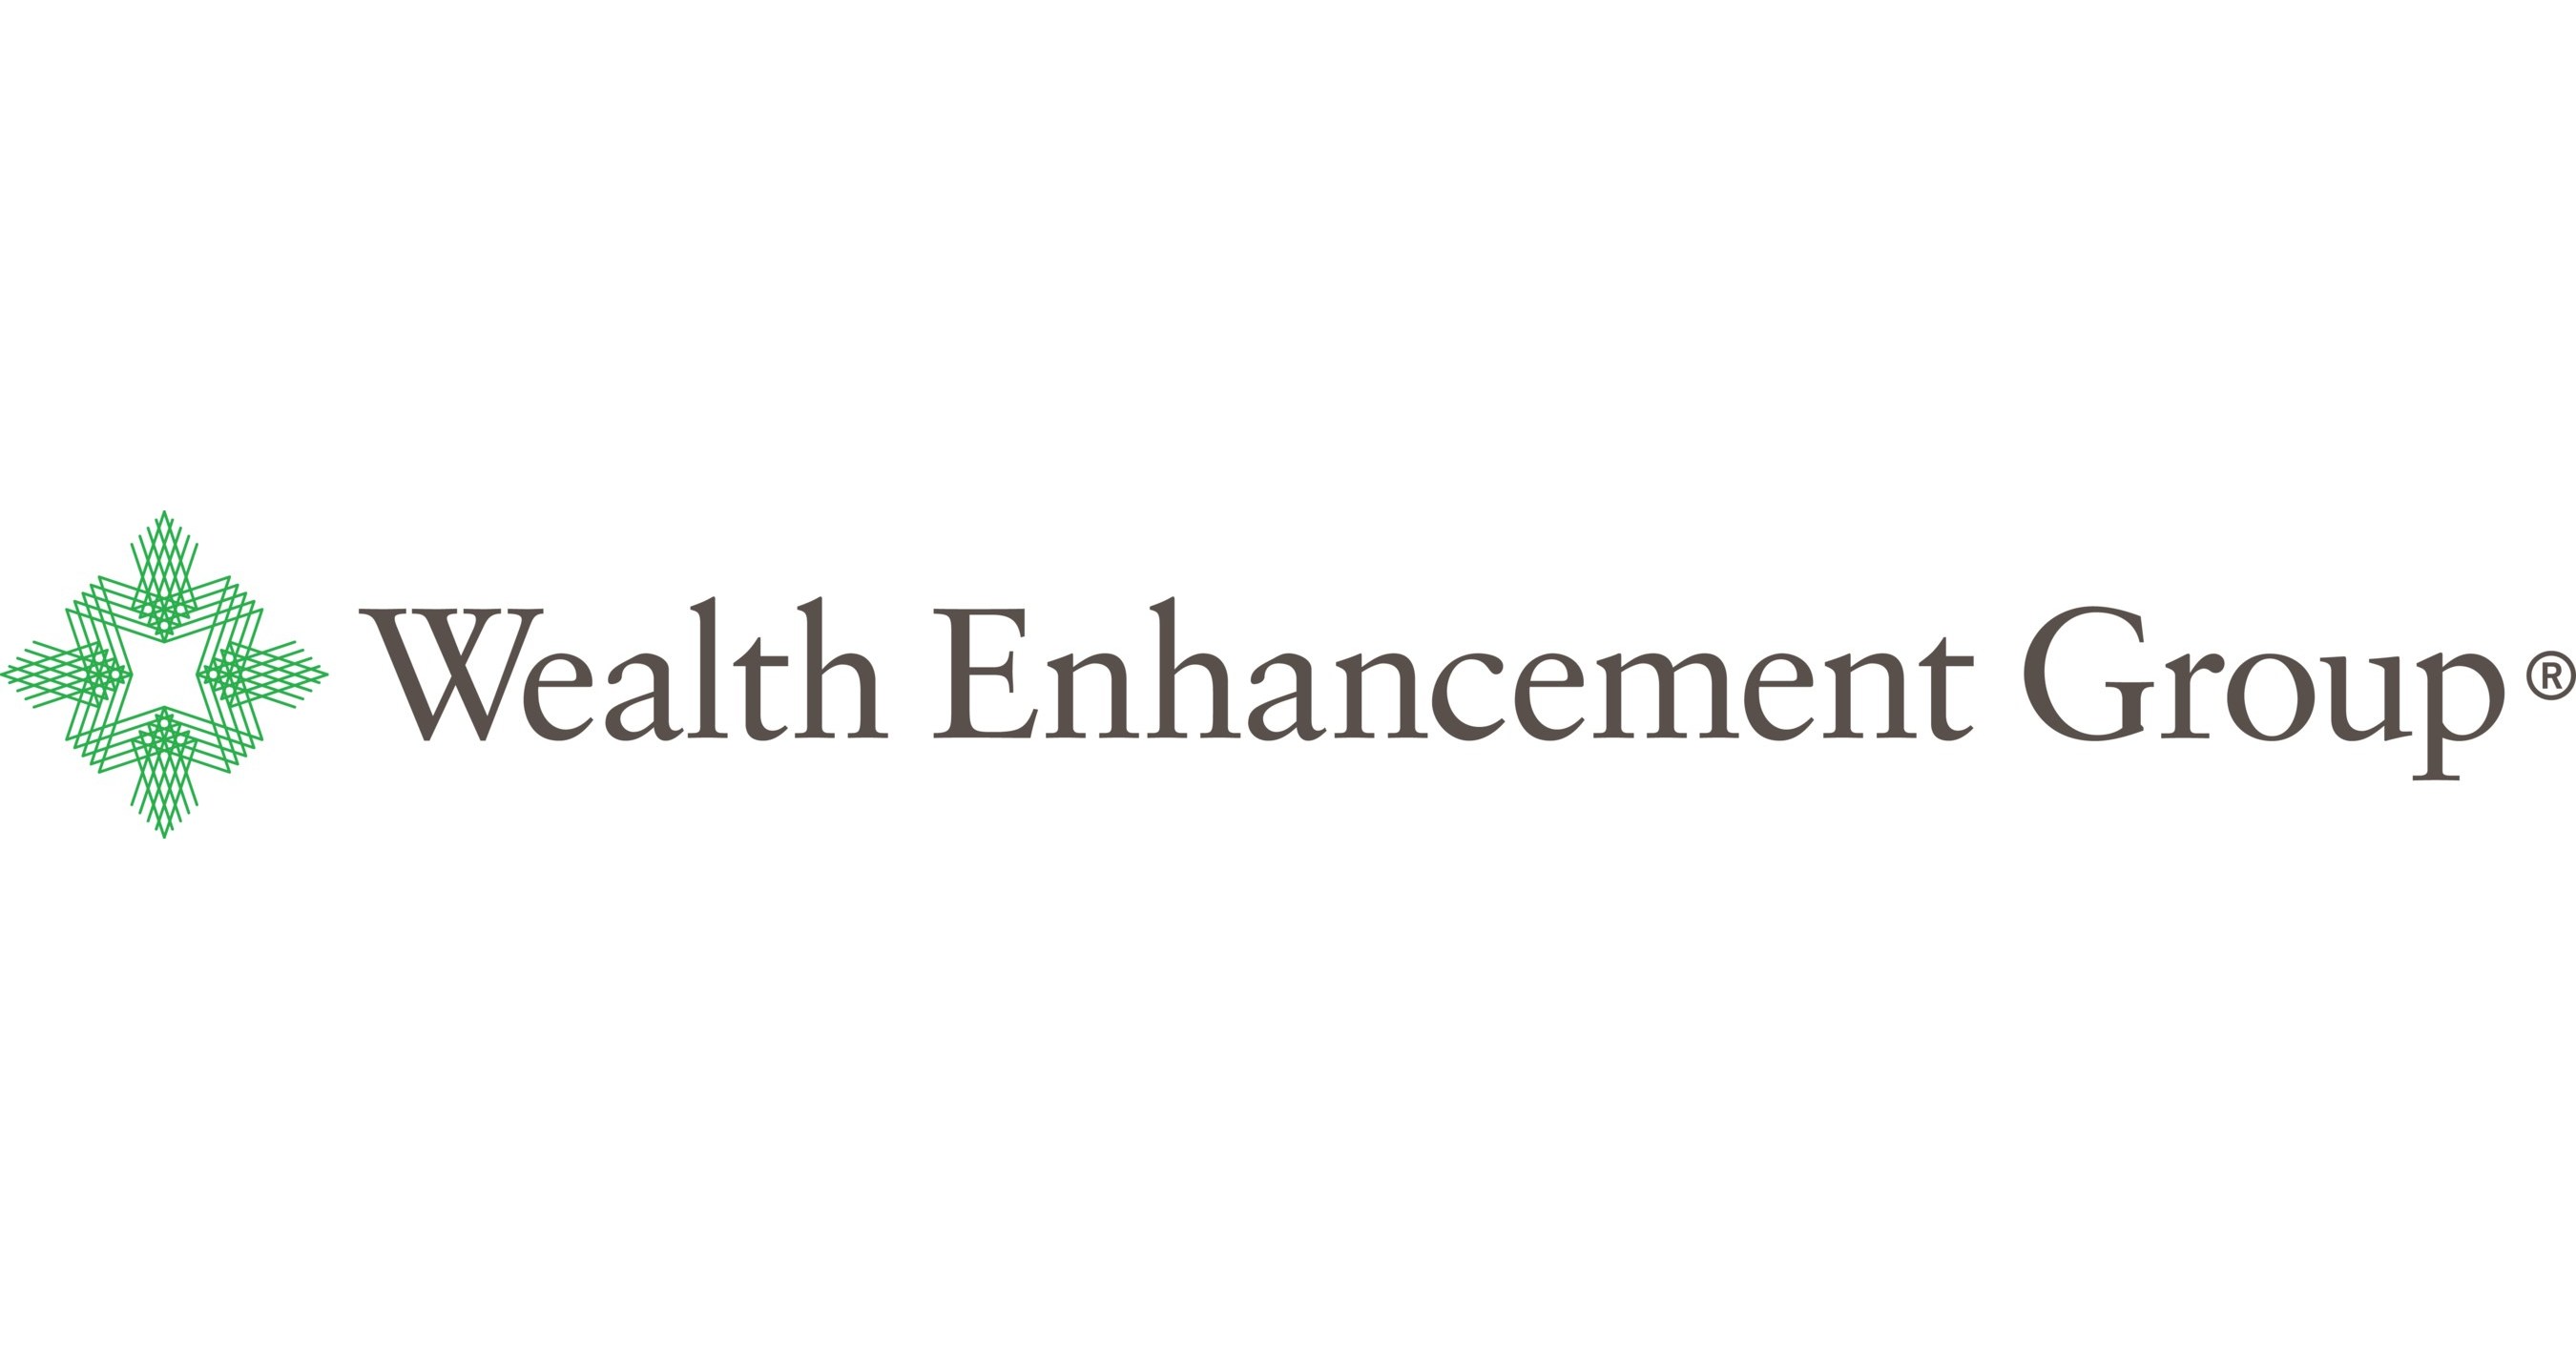 Wealth Enhancement Group Expands by Adding BFS Wealth Management, a Hybrid RIA with Over $523 Million in Client Assets